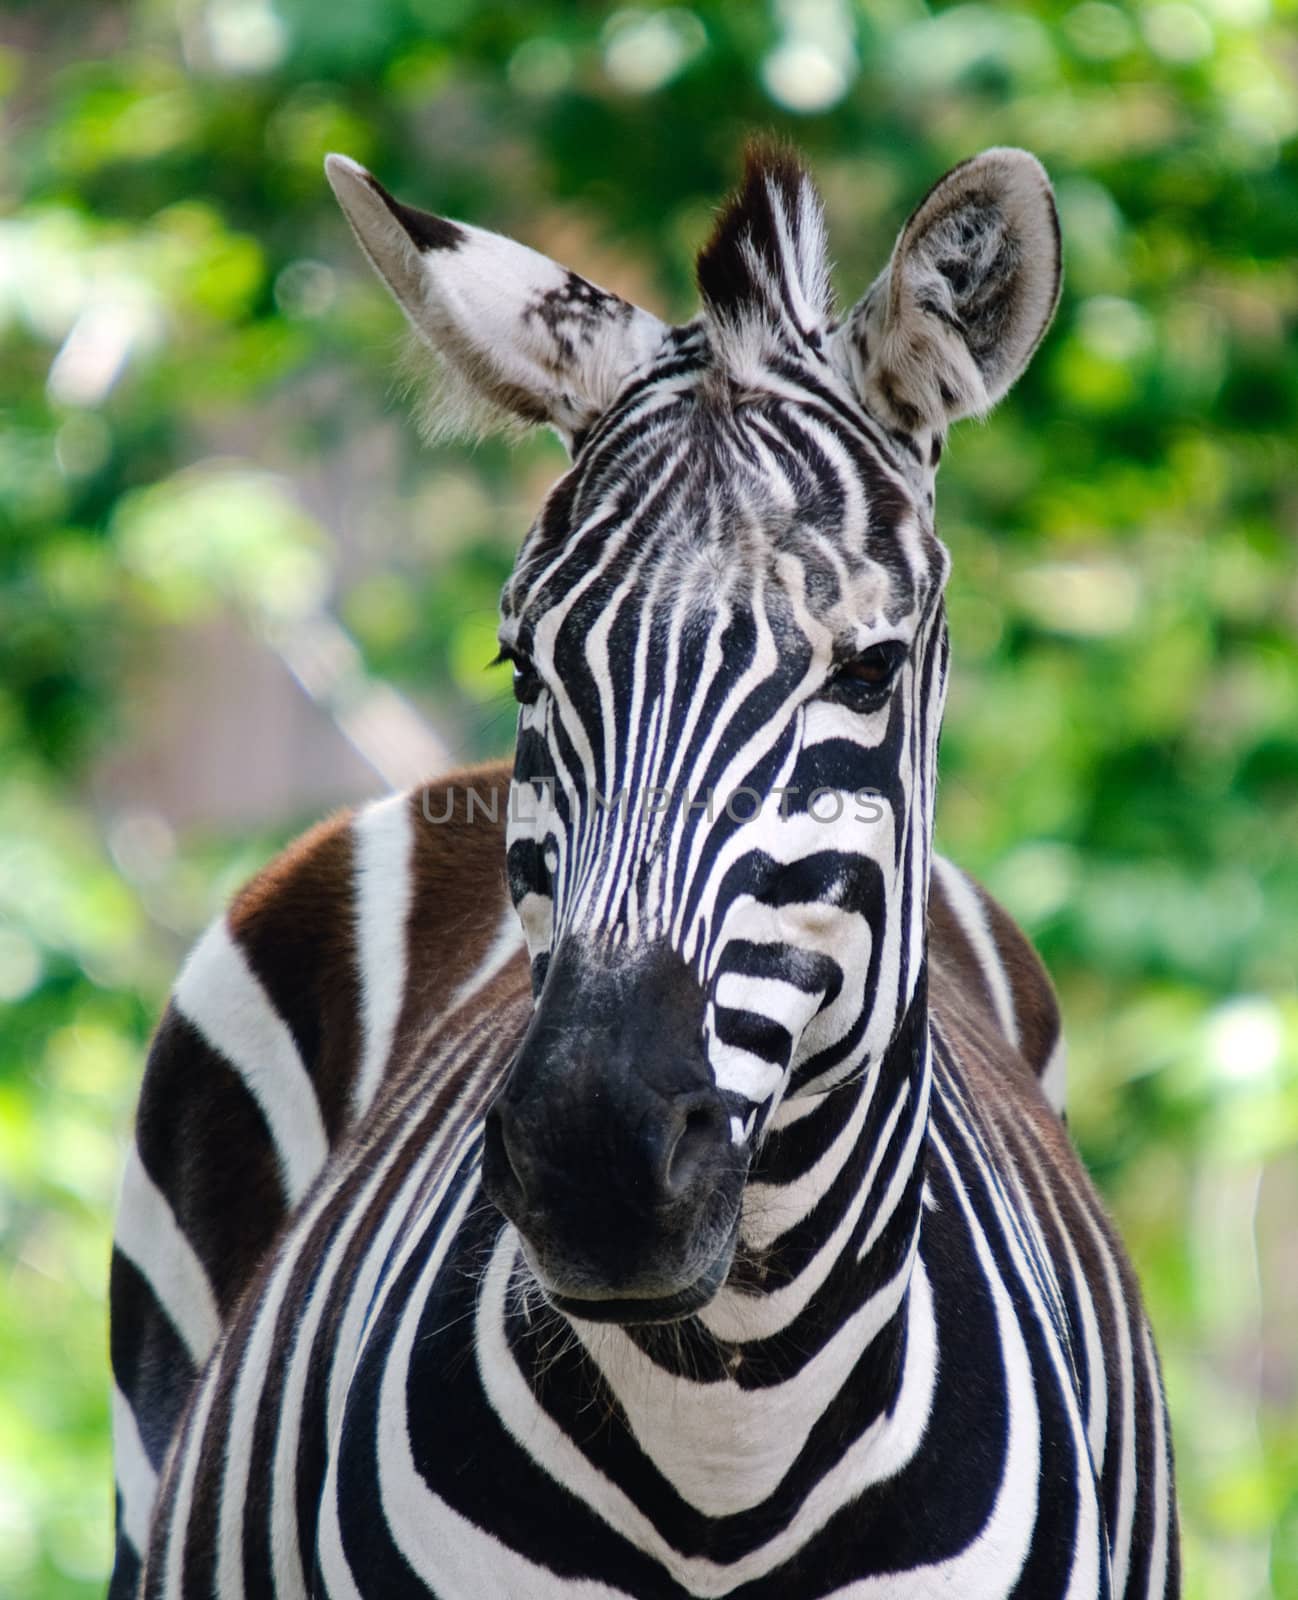 Close-up picture of a zebra on a sunny day